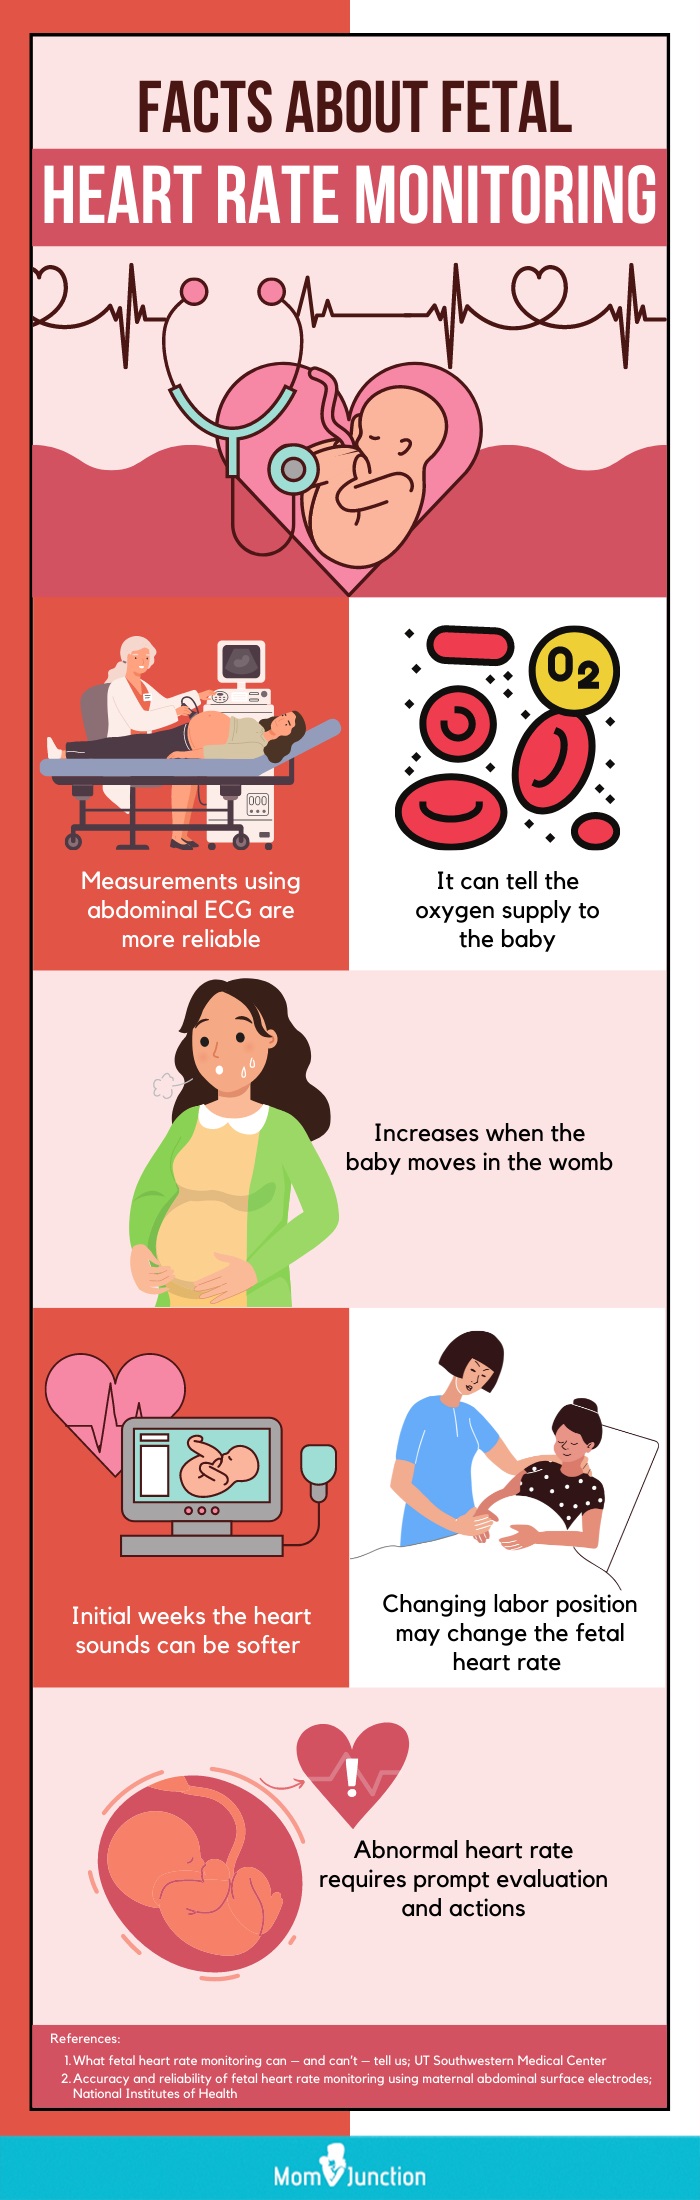 facts about fetal heart rate monitoring [infographic]